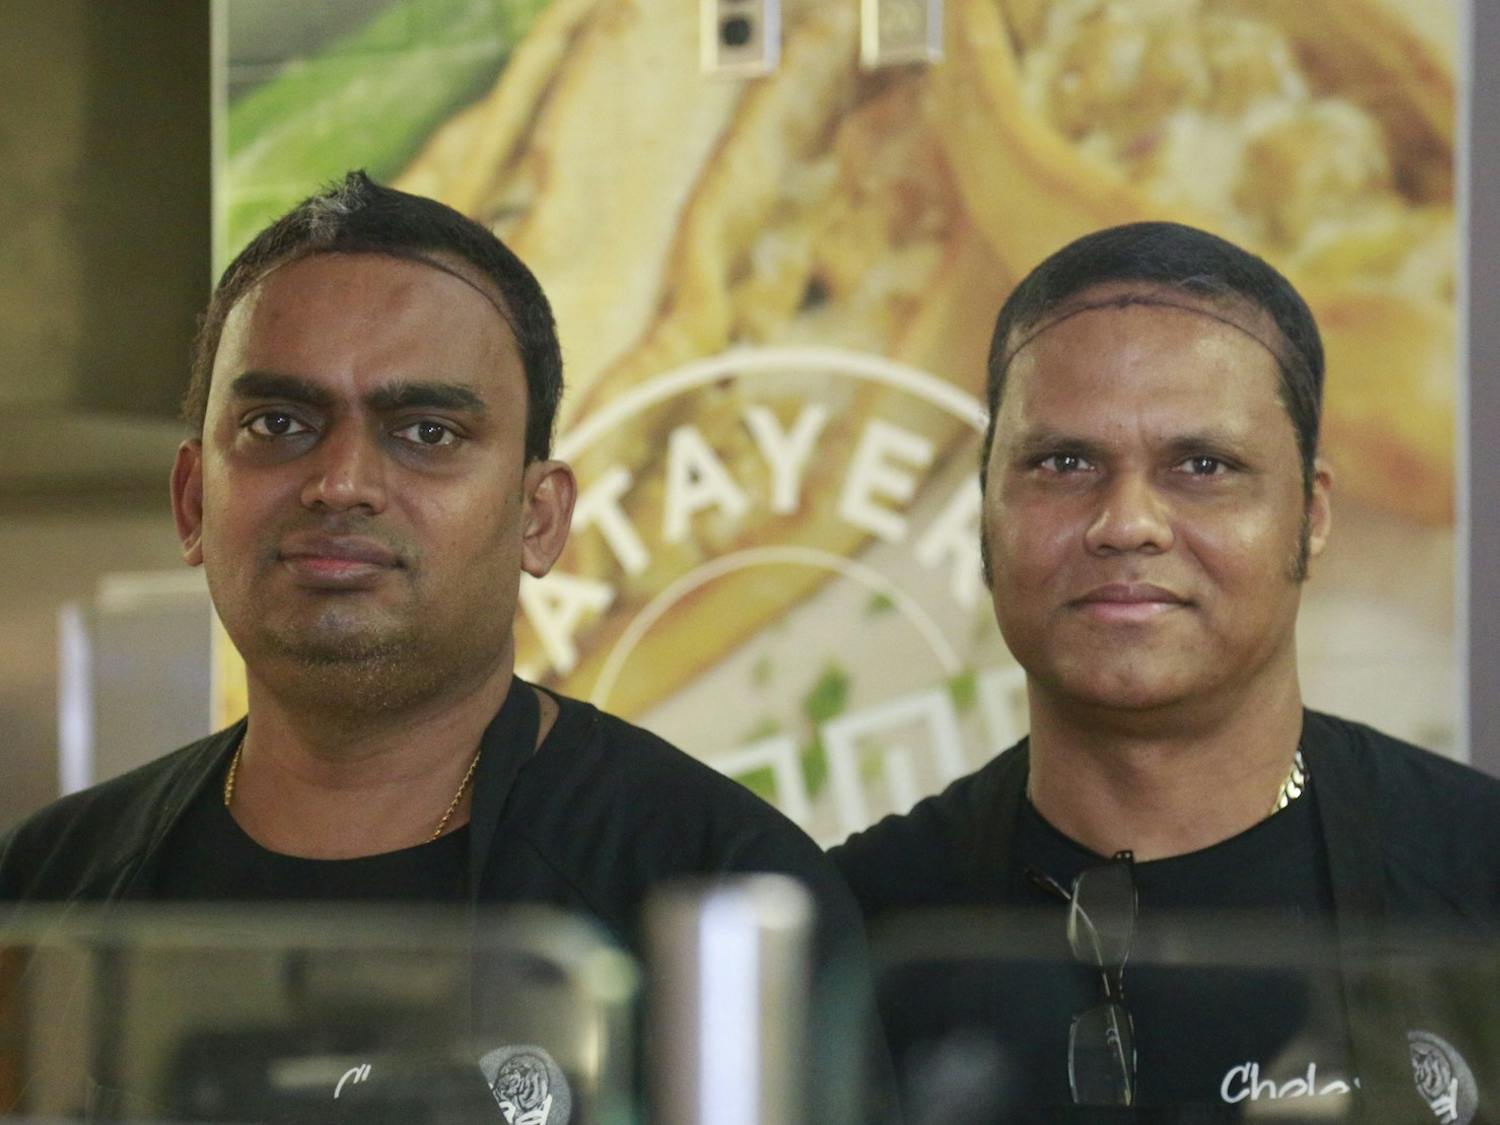 Raja Subramanian and Durai Murugan Somasundaram pose for a portrait at CholaNad in the bottom of Lenoir on Wednesday, Feb. 5, 2020. They are from Tamil Nadu, a southern region in India that inspires many CholaNad dishes.